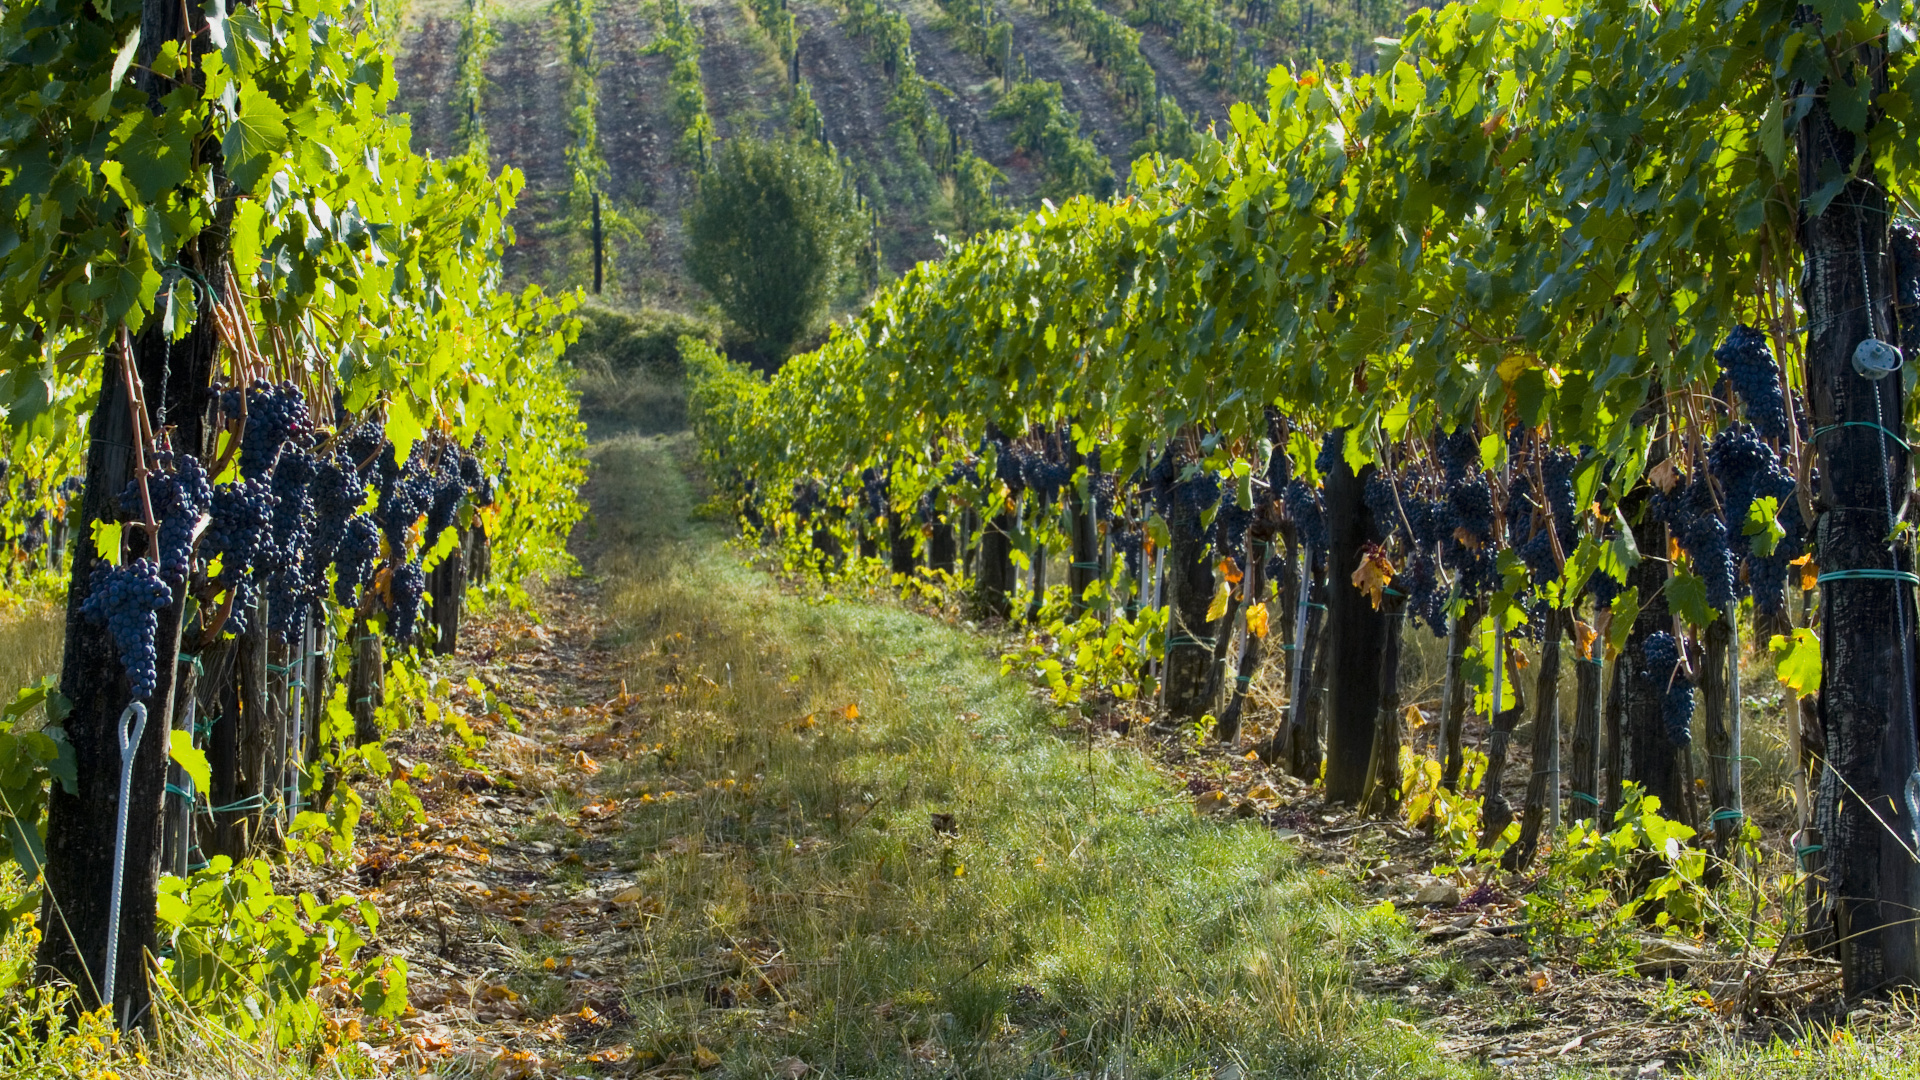 A grape vineyard. The parable of the laborers in the vineyard teaches lessons about the economy of the Kingdom of Heaven and the love of God for his children. Adobe Stock image.